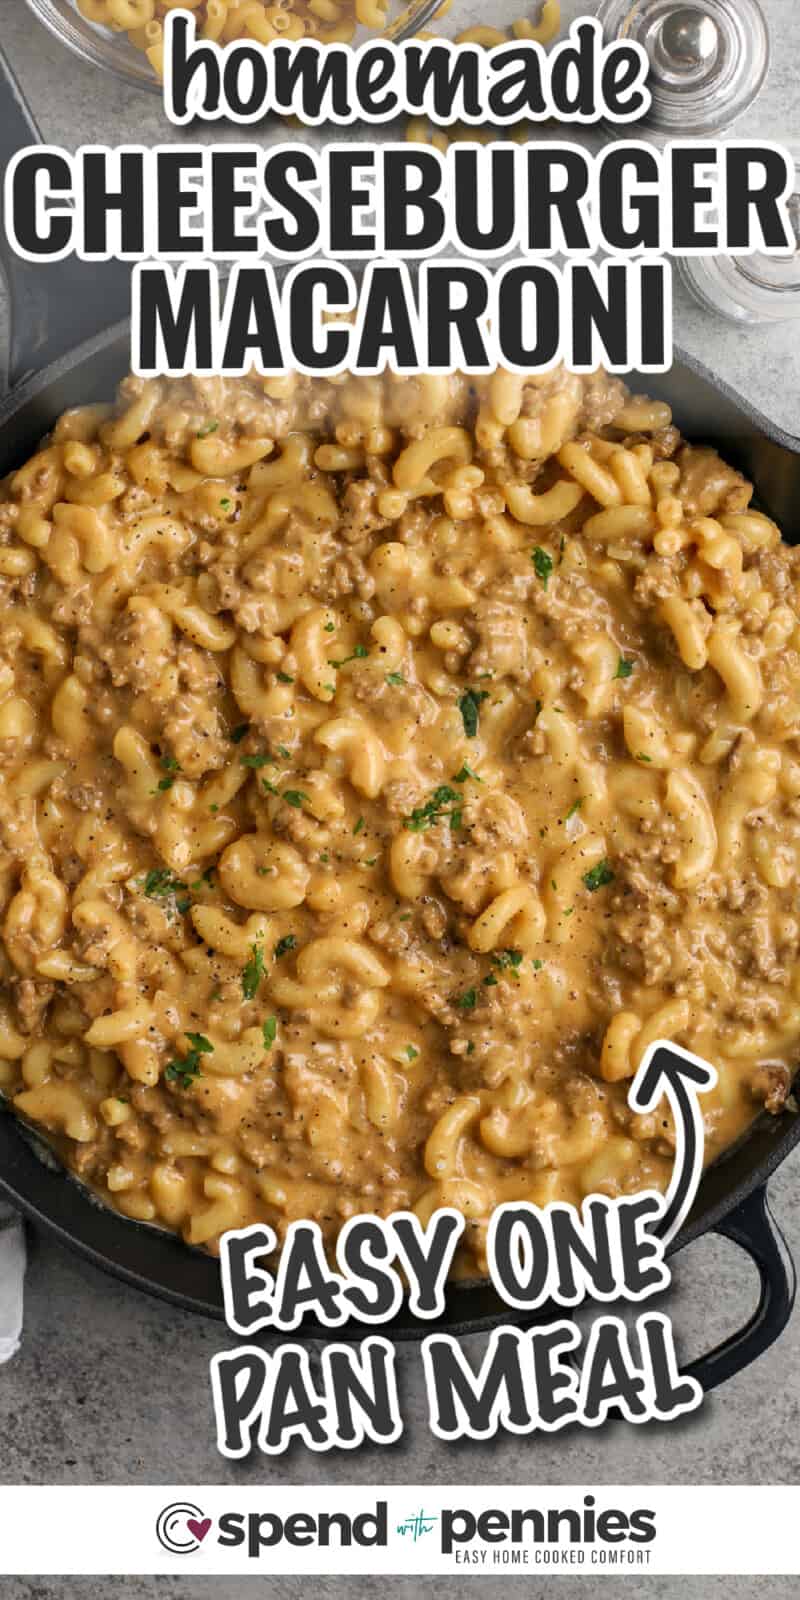 A pan of homemade cheeseburger macaroni shown with a title